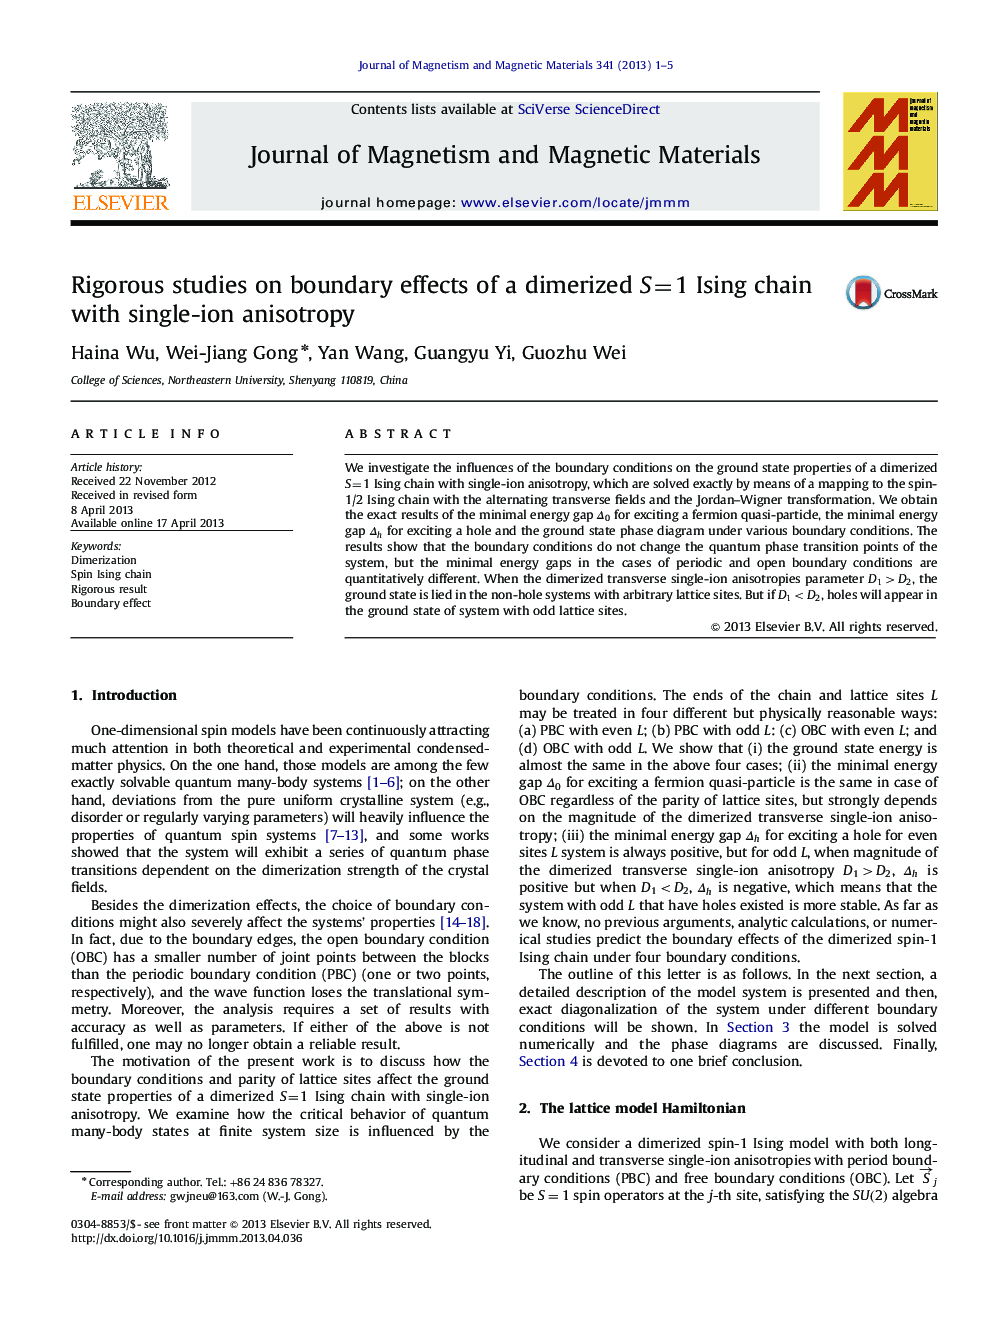 Rigorous studies on boundary effects of a dimerized S=1 Ising chain with single-ion anisotropy